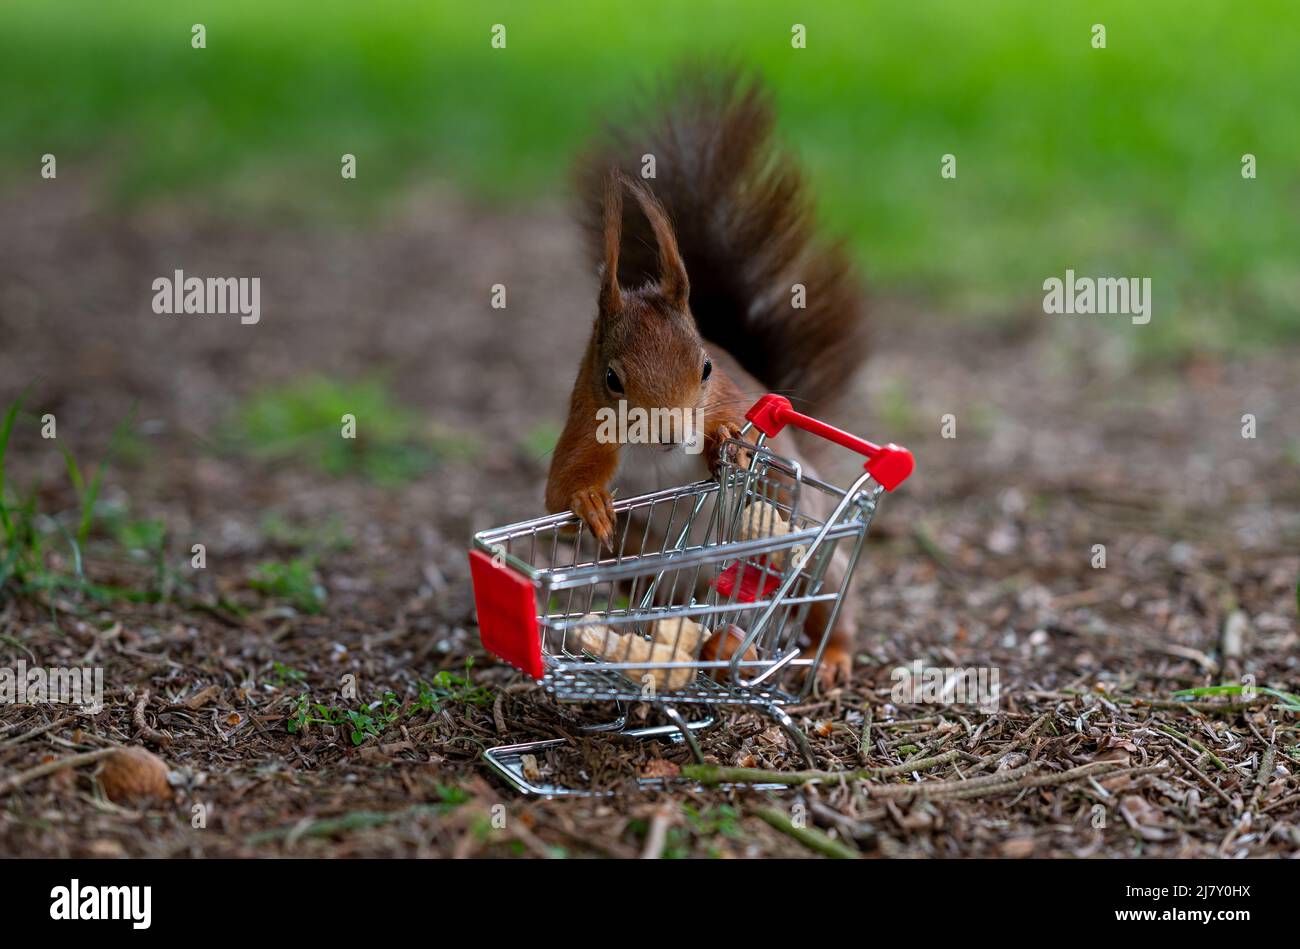 European red squirrel puts peanuts and hazelnuts in a shopping trolley. Stock Photo